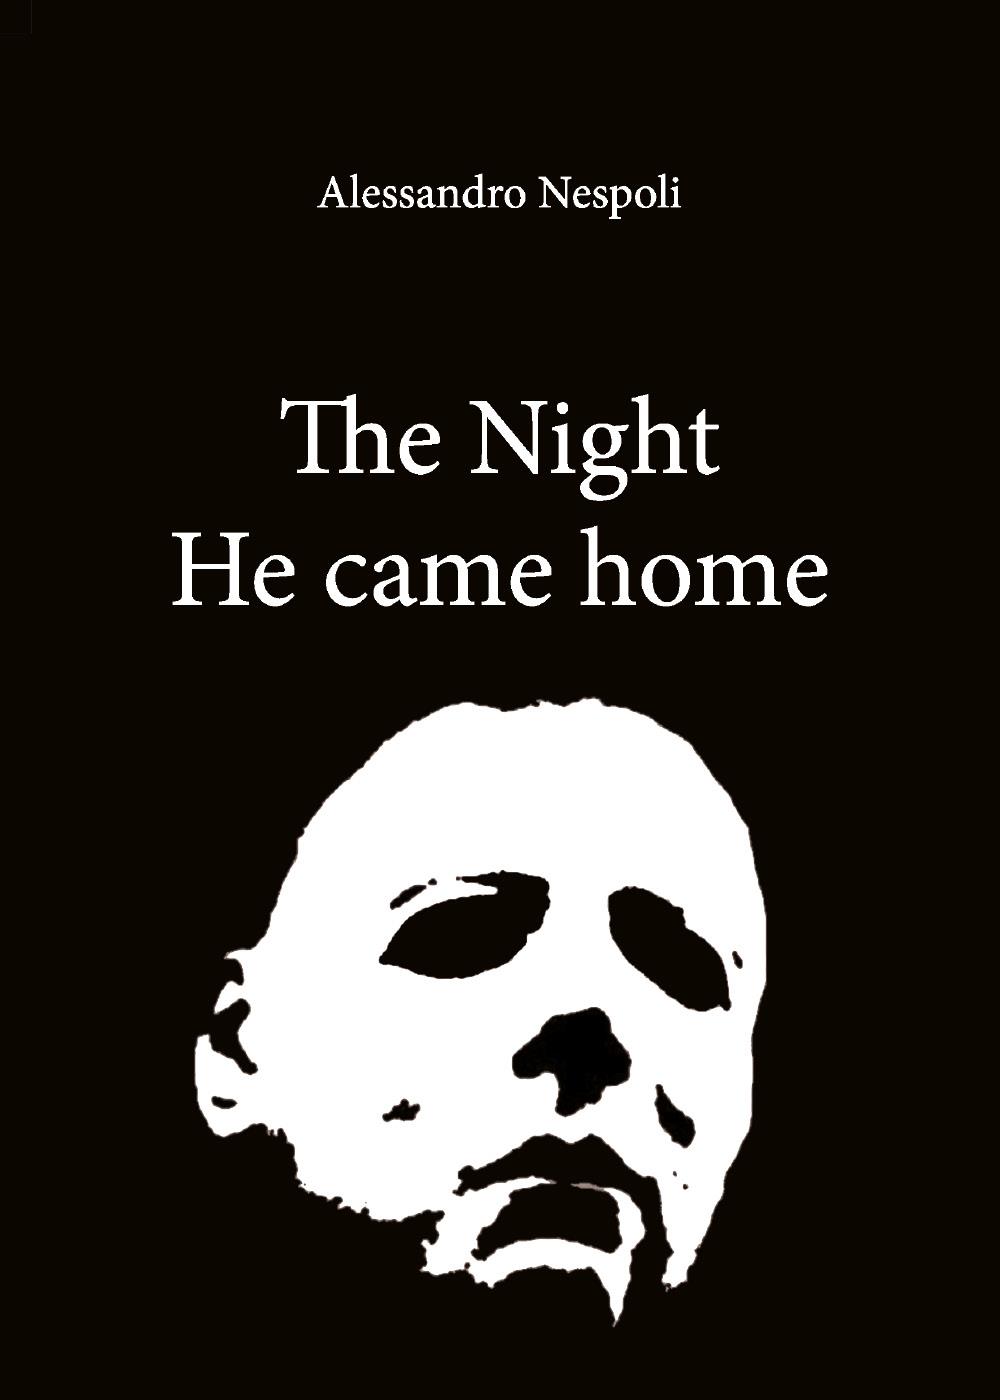 The Night He came home